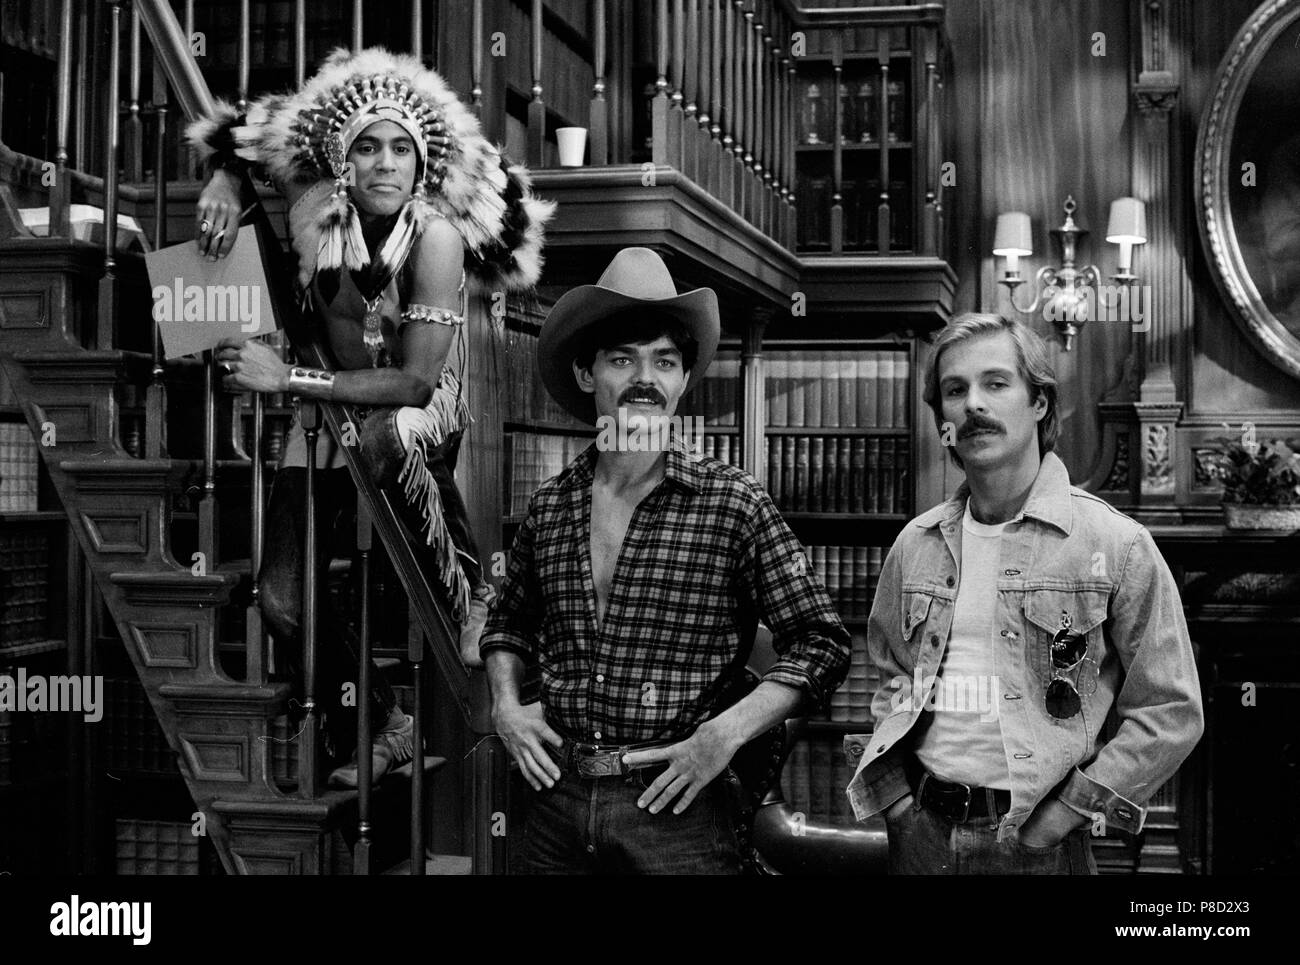 Can T Stop The Music 19 Village People Randy Jones As The Cowboy Date 1980 Stock Photo Alamy